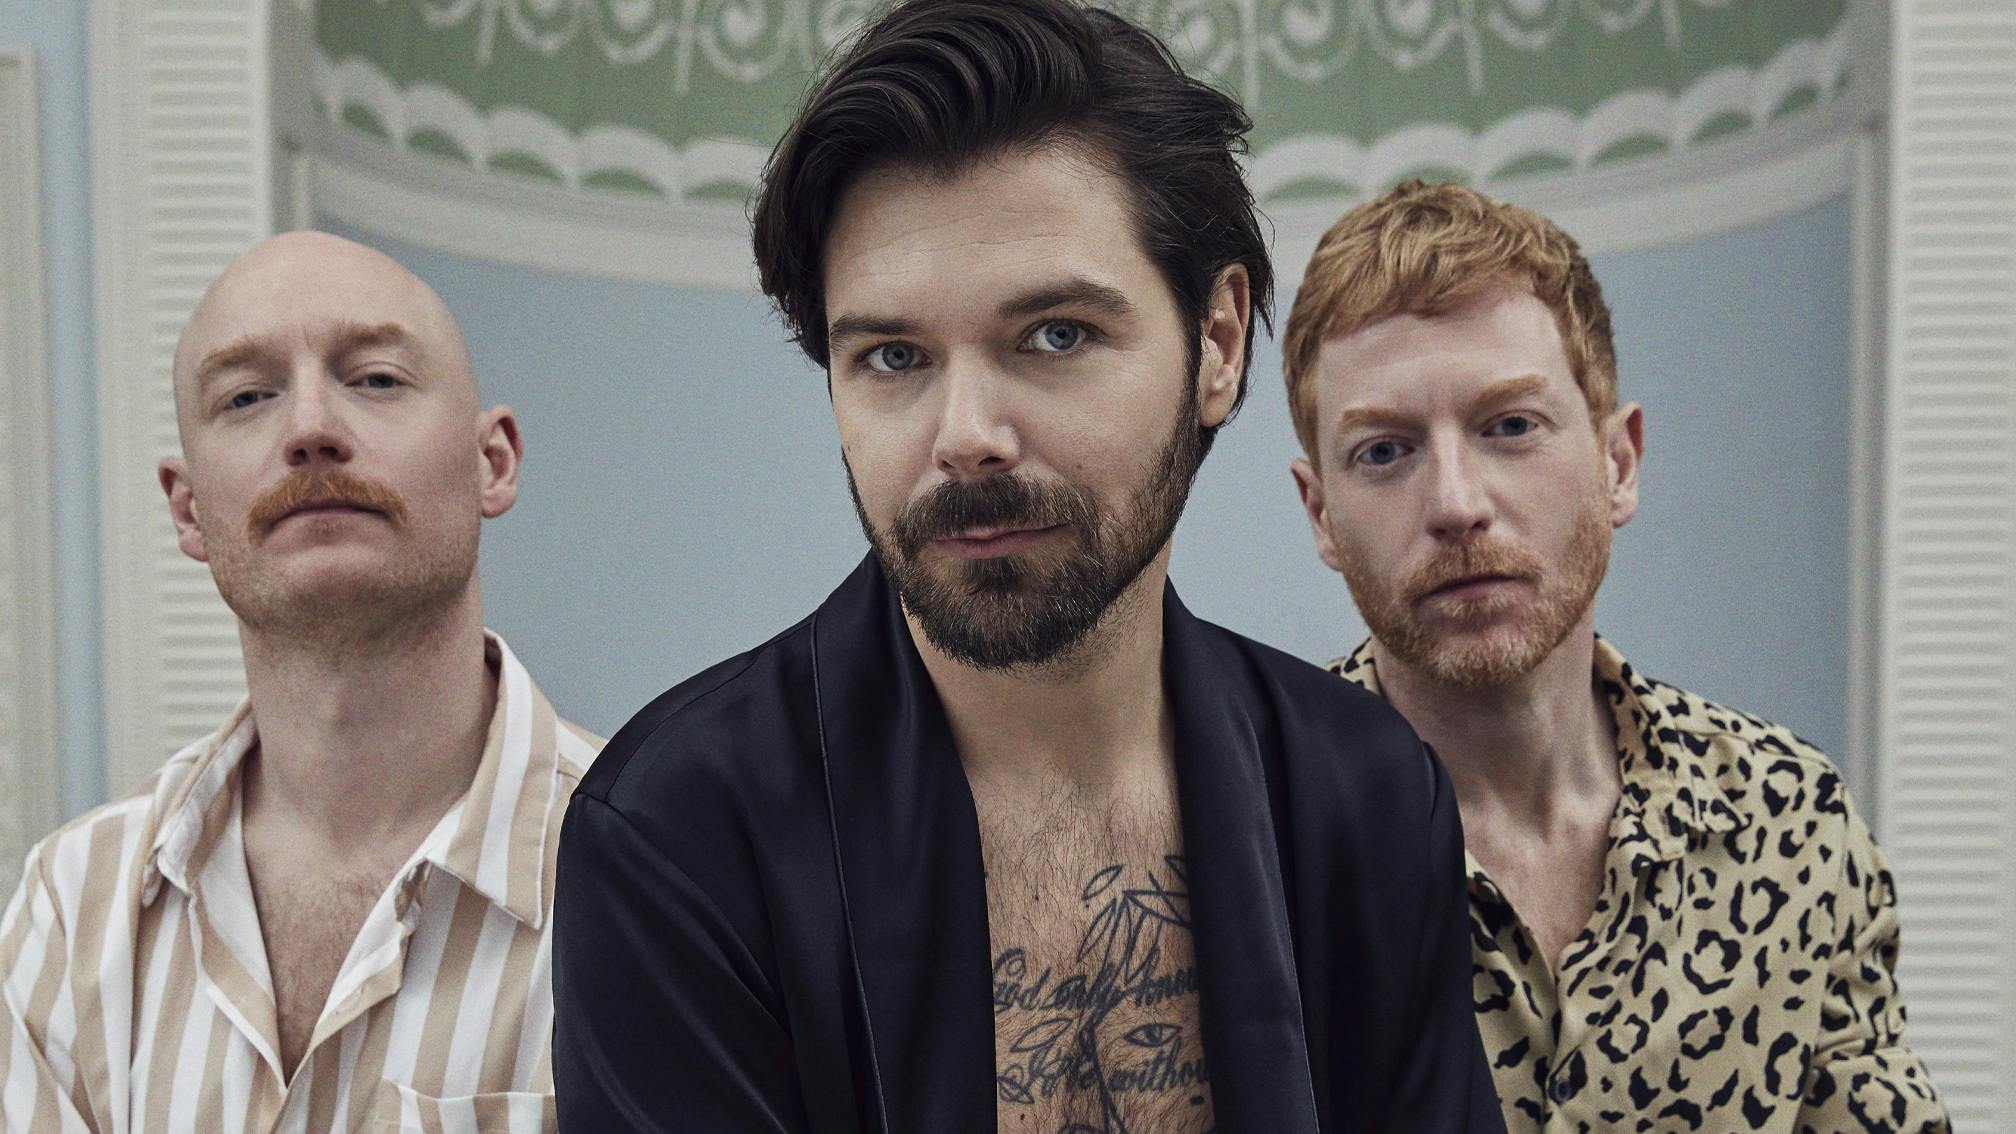 Biffy Clyro Announce The Fingers Crossed Tour 2021